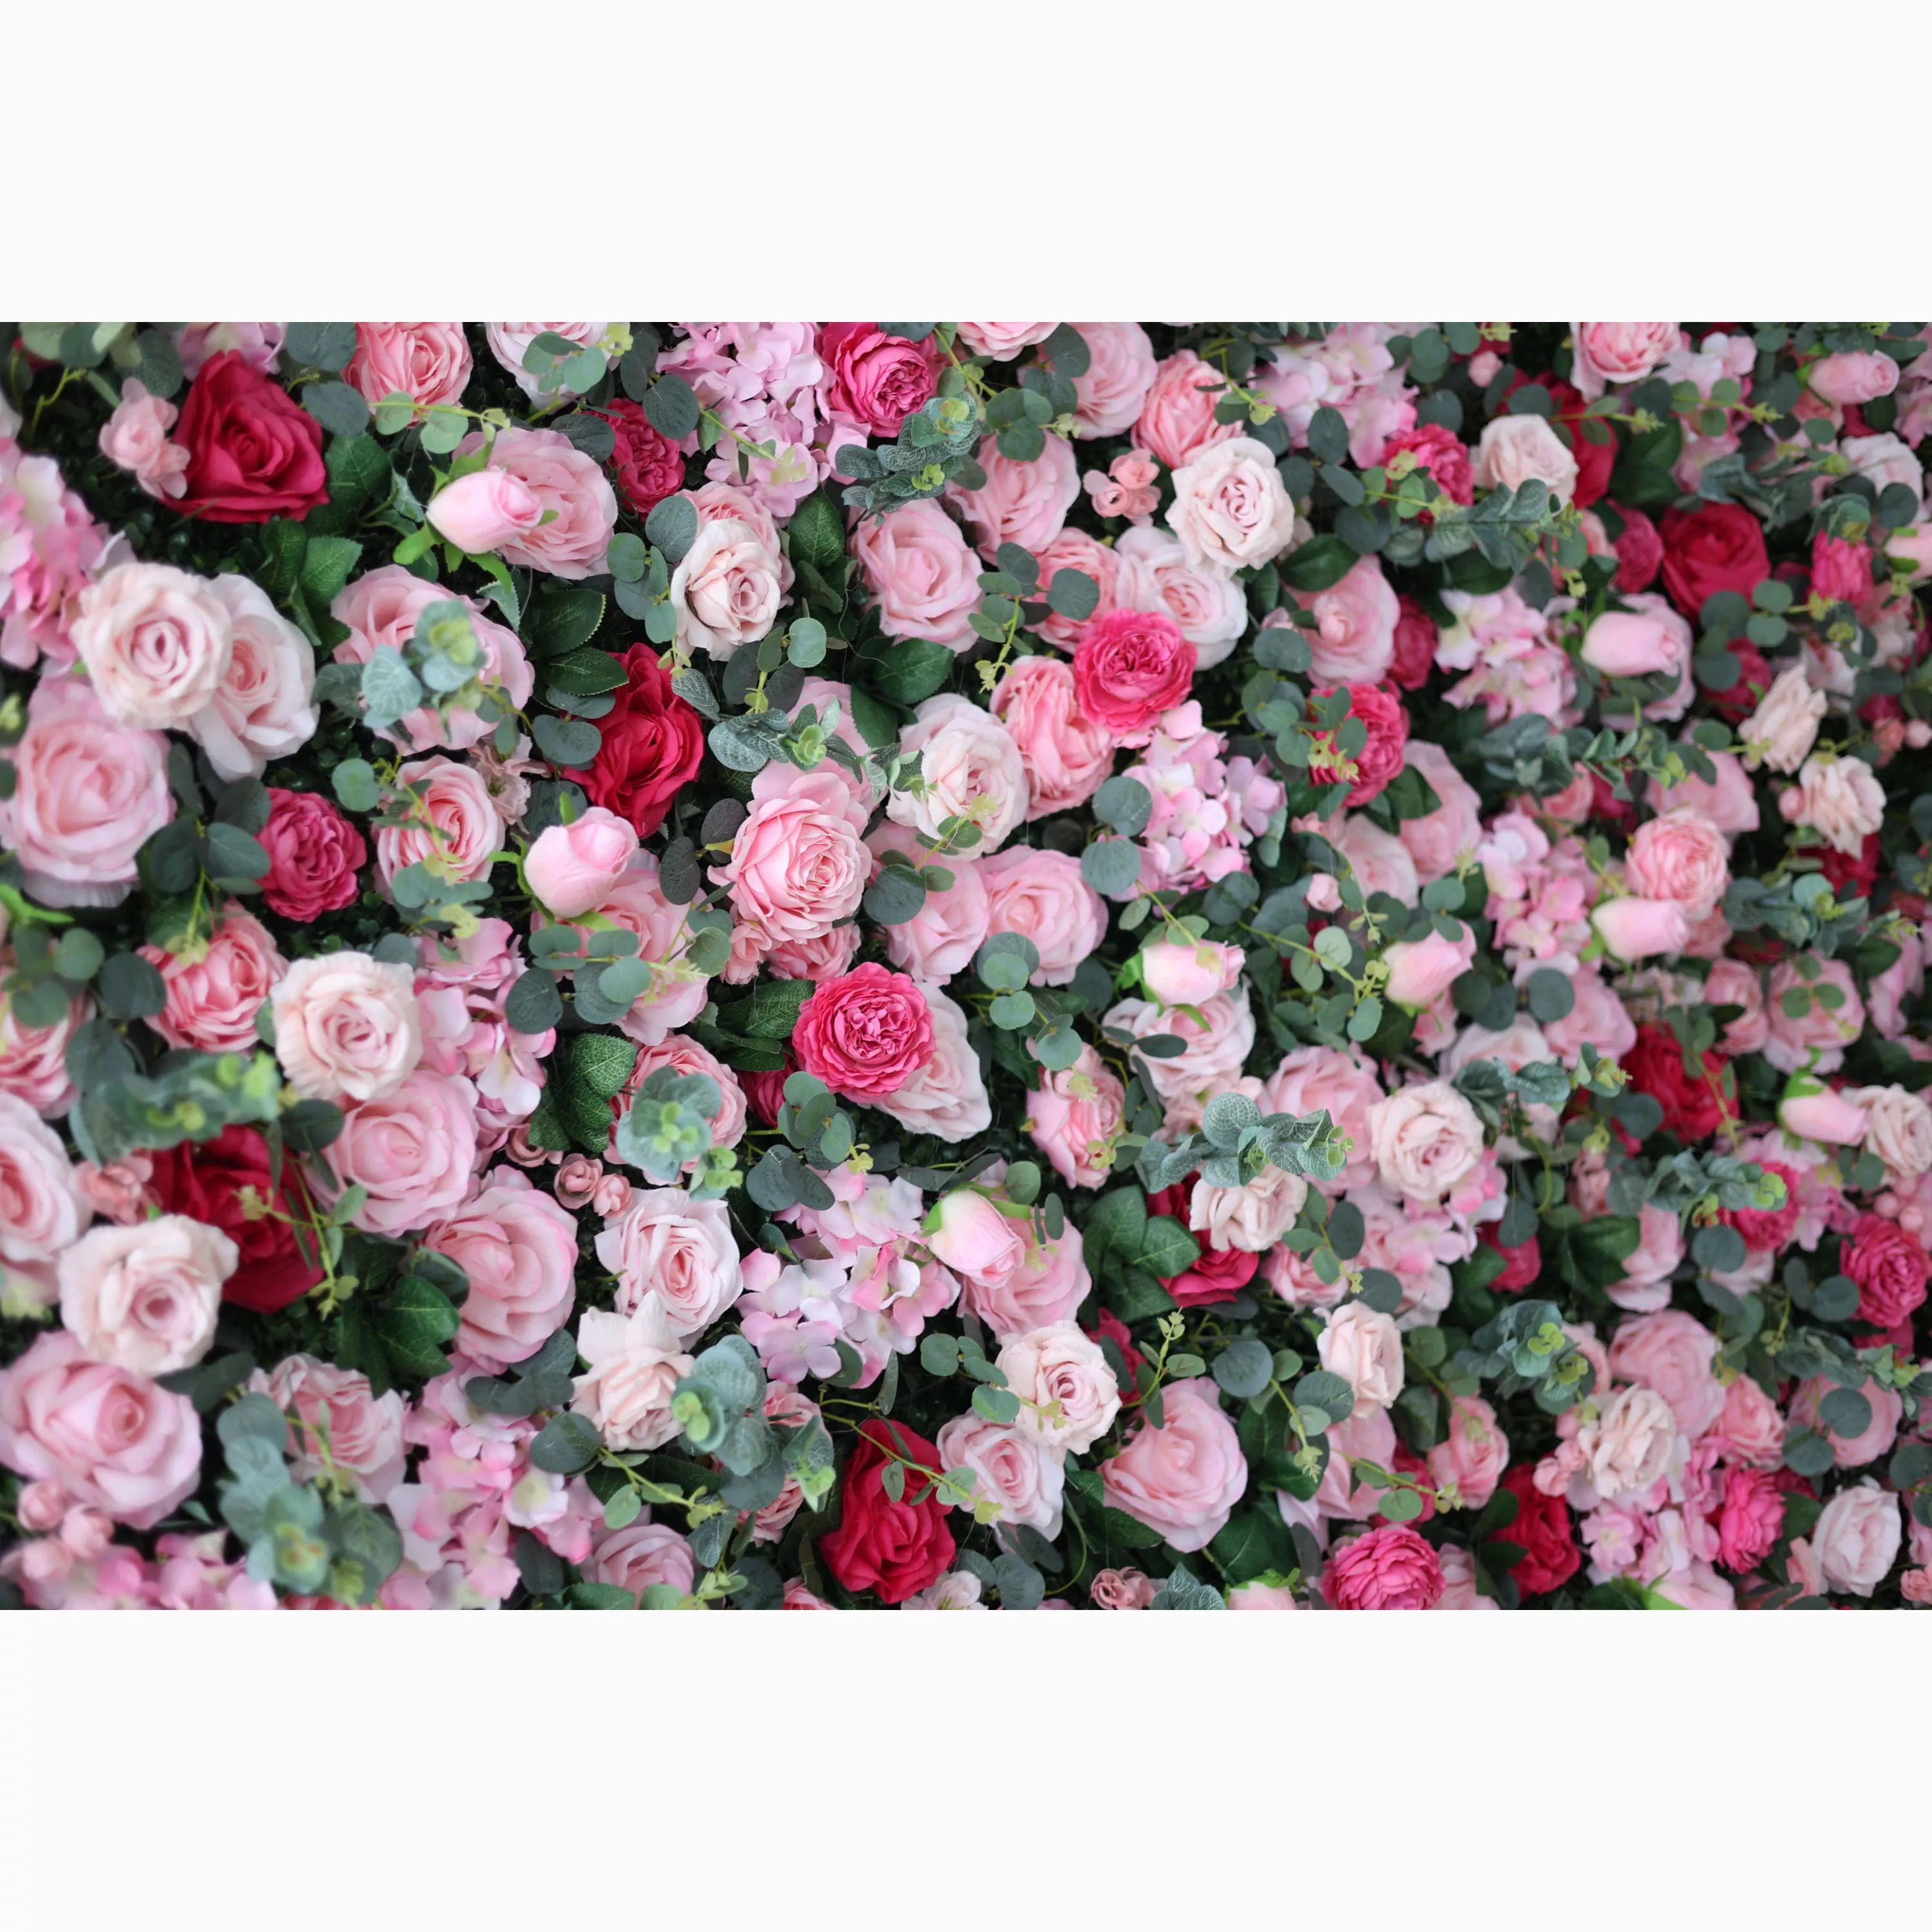 Valar Flowers Presents: Blooming Bliss Artificial Fabric Flower Wall – Lush Pink, Red, and White Rose Display for Weddings, Events, and Home Décor – Ultimate Floral Backdrop for Romantic Ambiances-VF-214